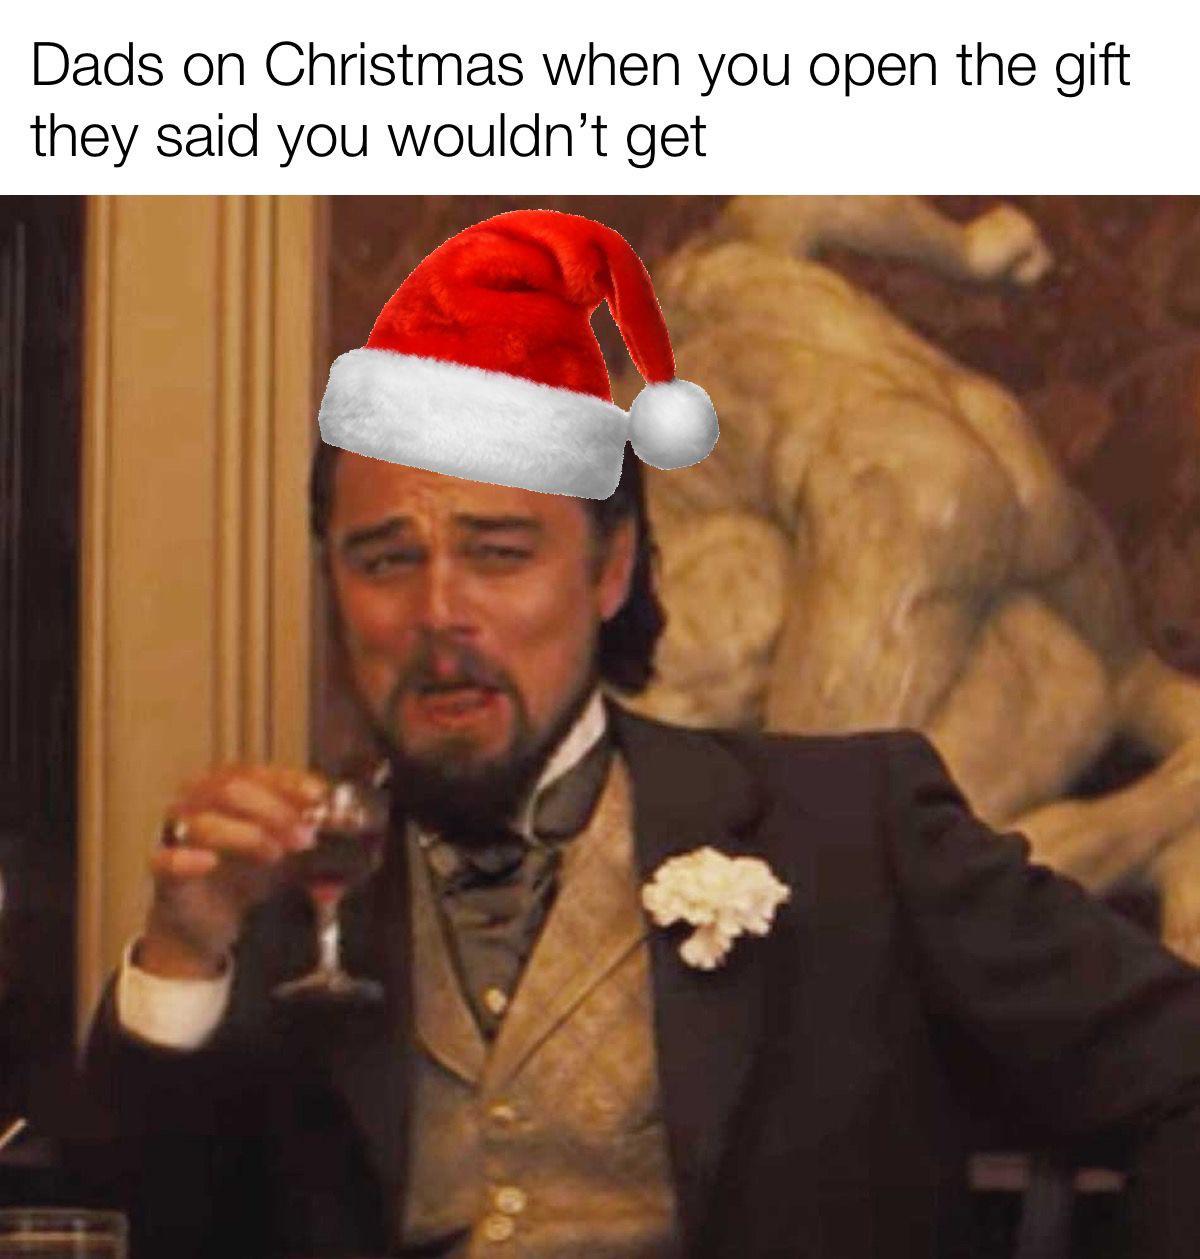 self explanatory meme - Dads on Christmas when you open the gift they said you wouldn't get